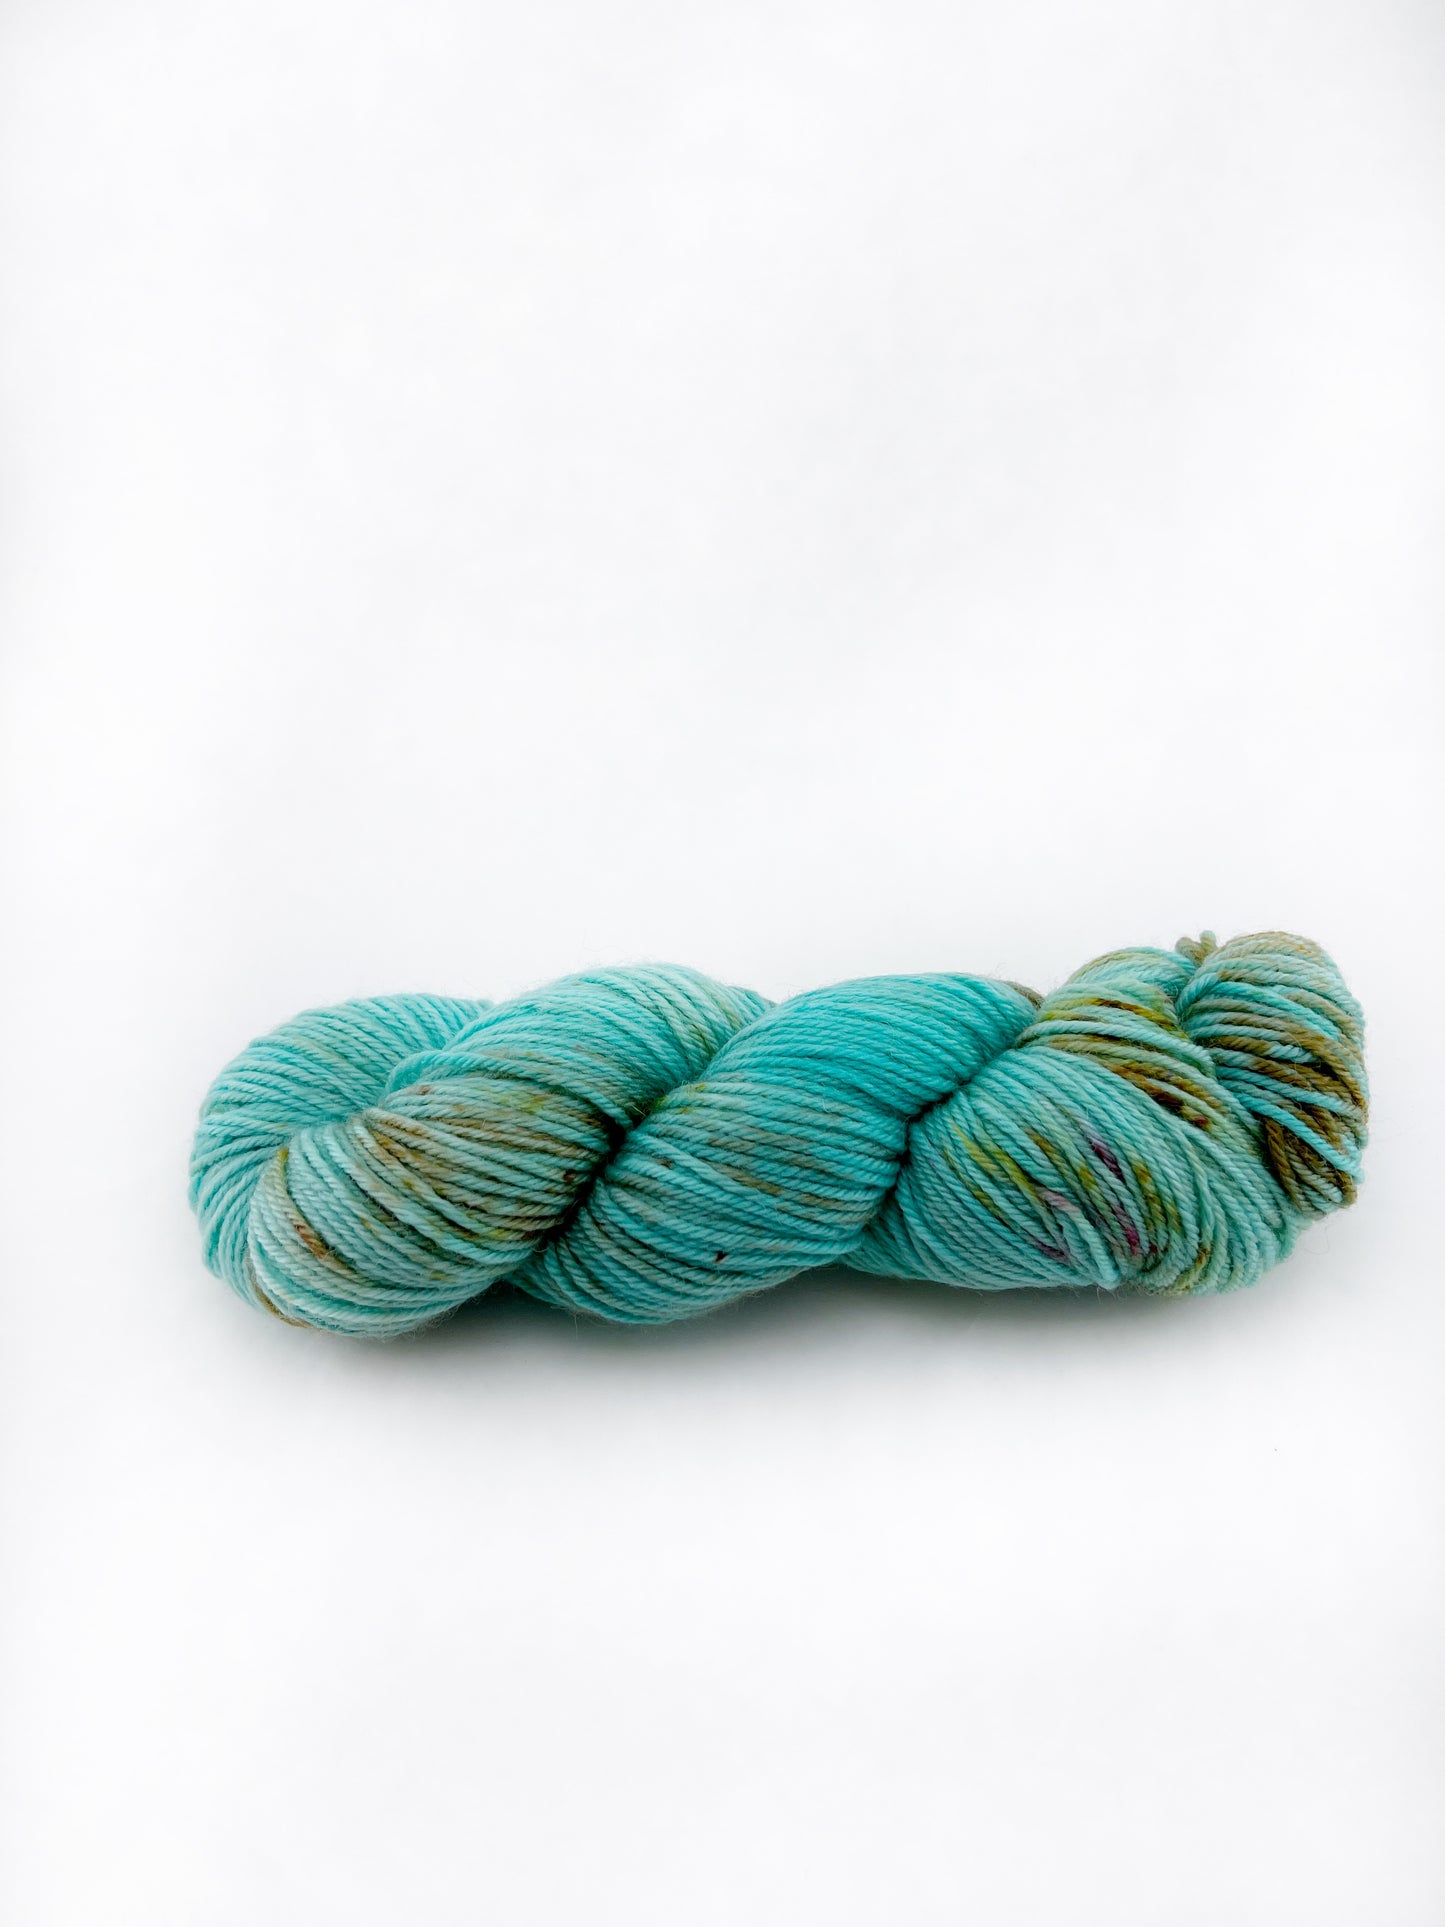 TARNISHED TURQUOISE - OOPSIE! Turquoise Blue Brown Speckled DK